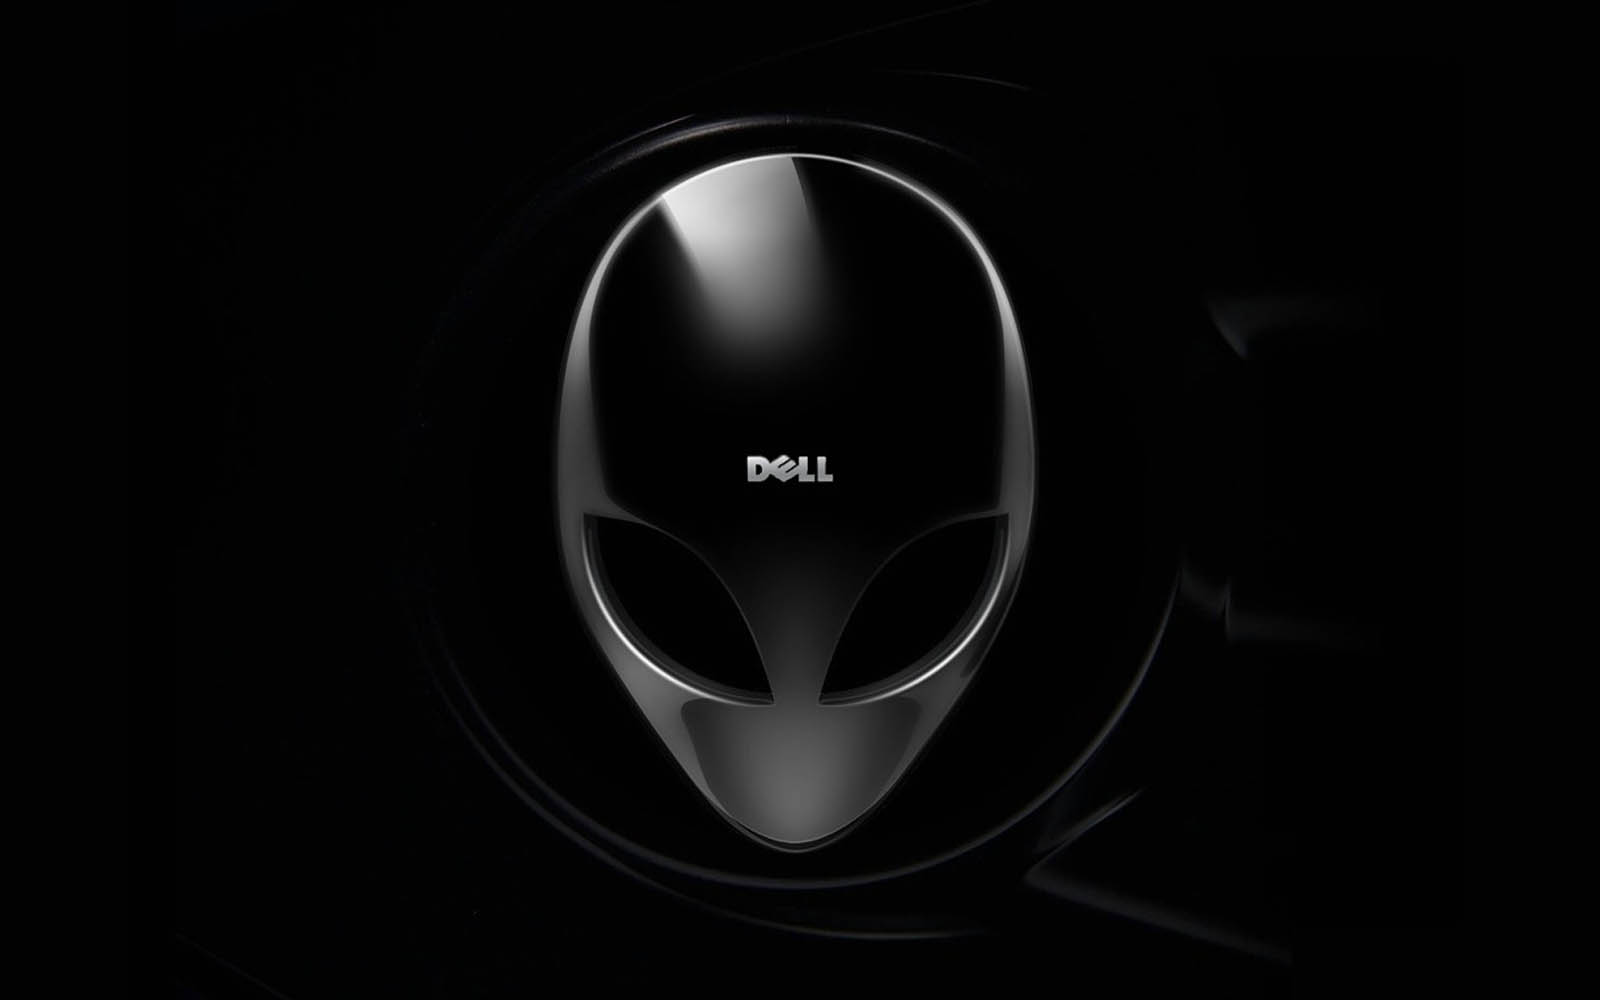 Tag Dell Wallpaper Image Paos Pictures And